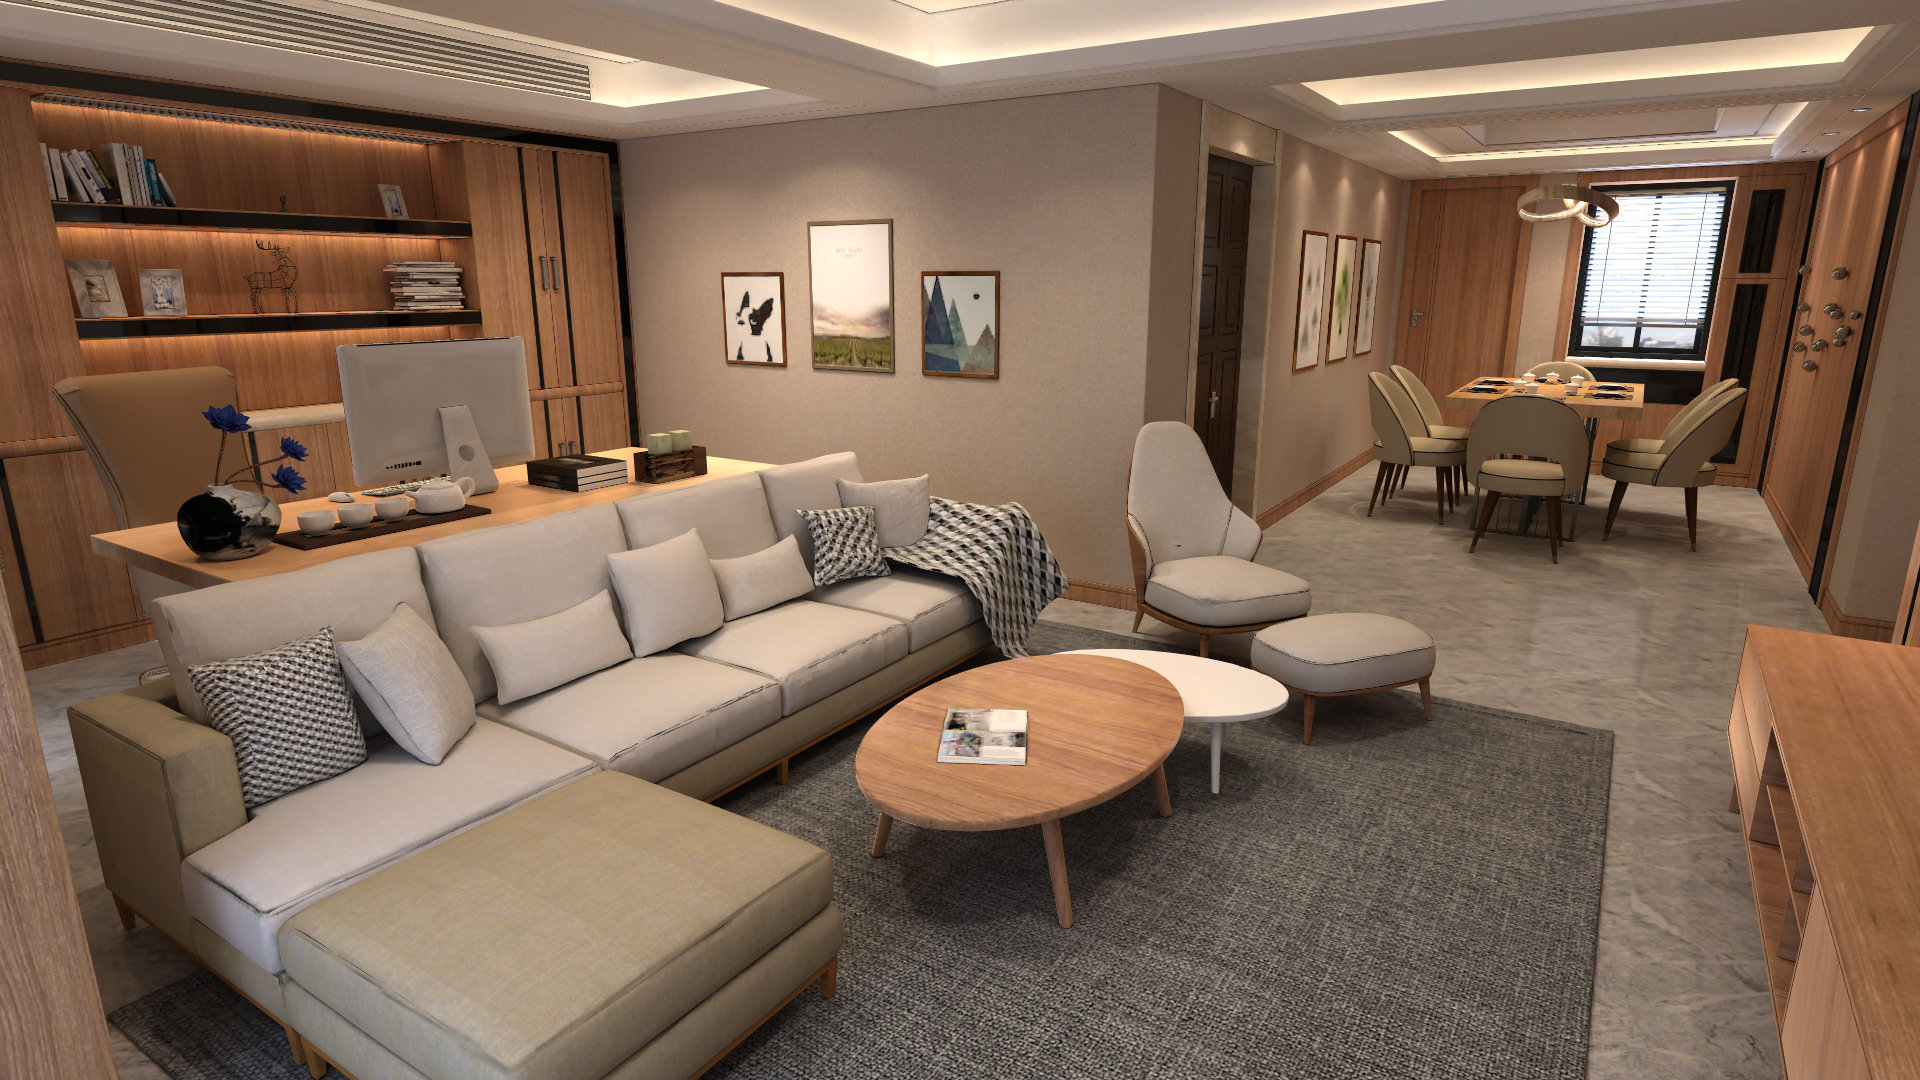 Living room - 3D realtime architectural visualization